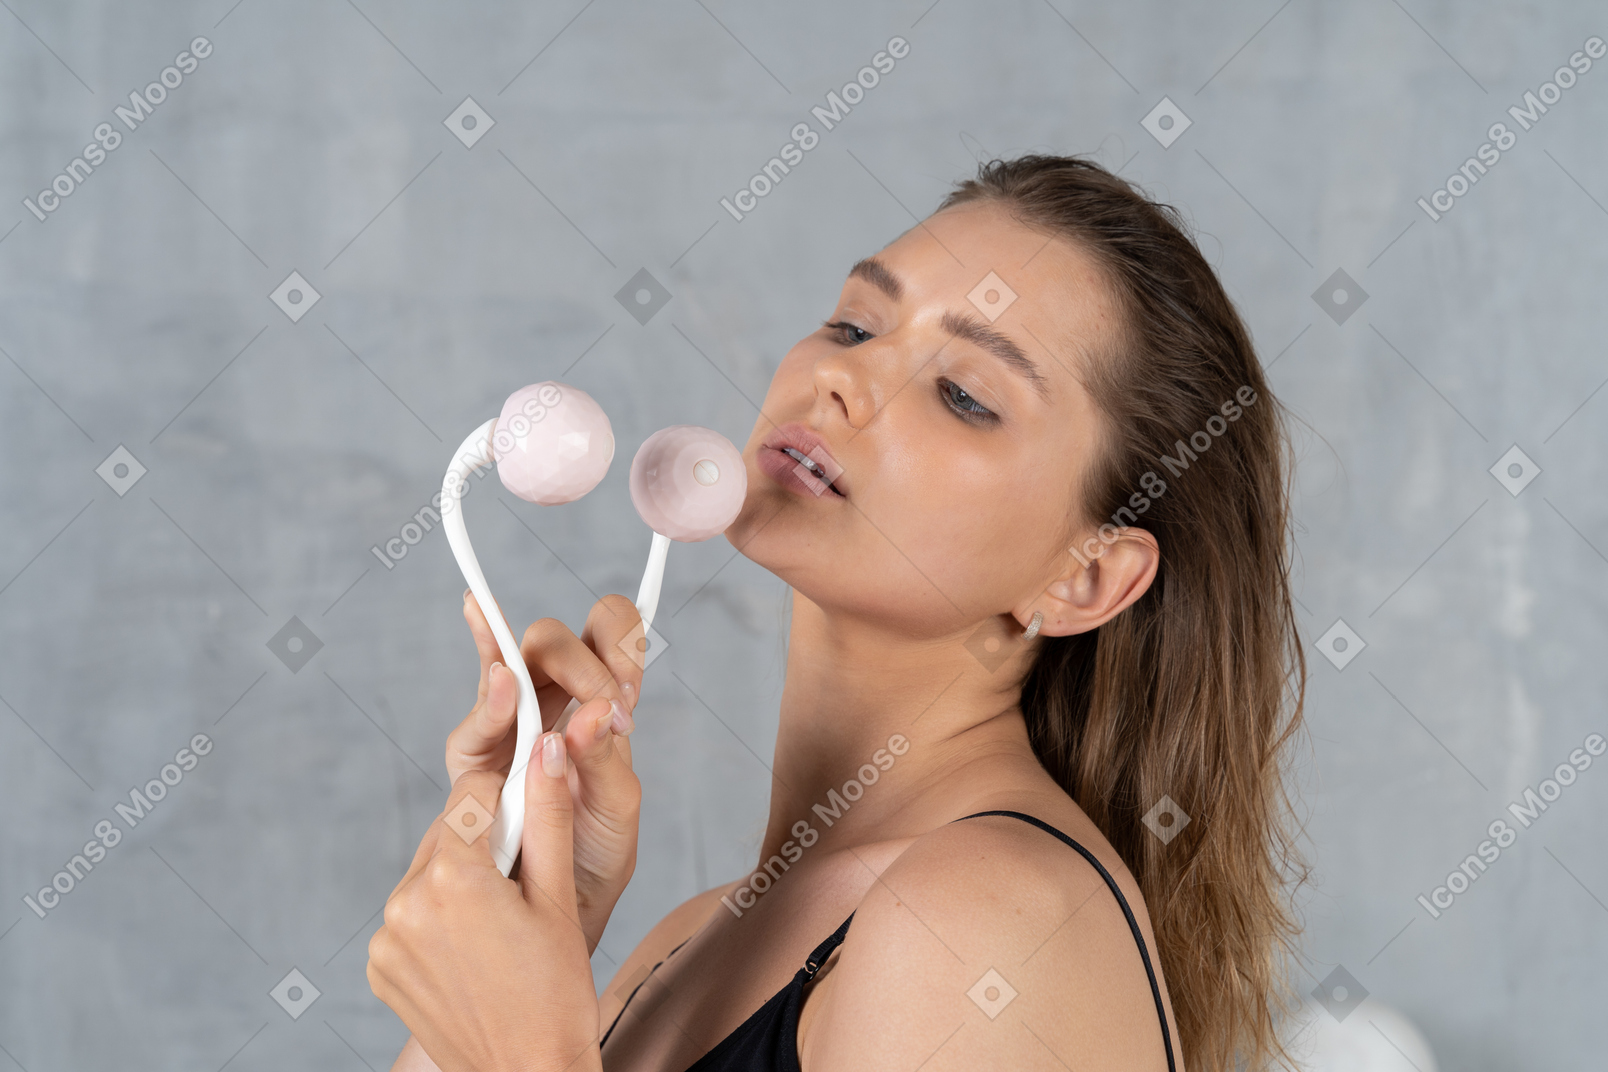 Portrait of a young woman holding facial massager